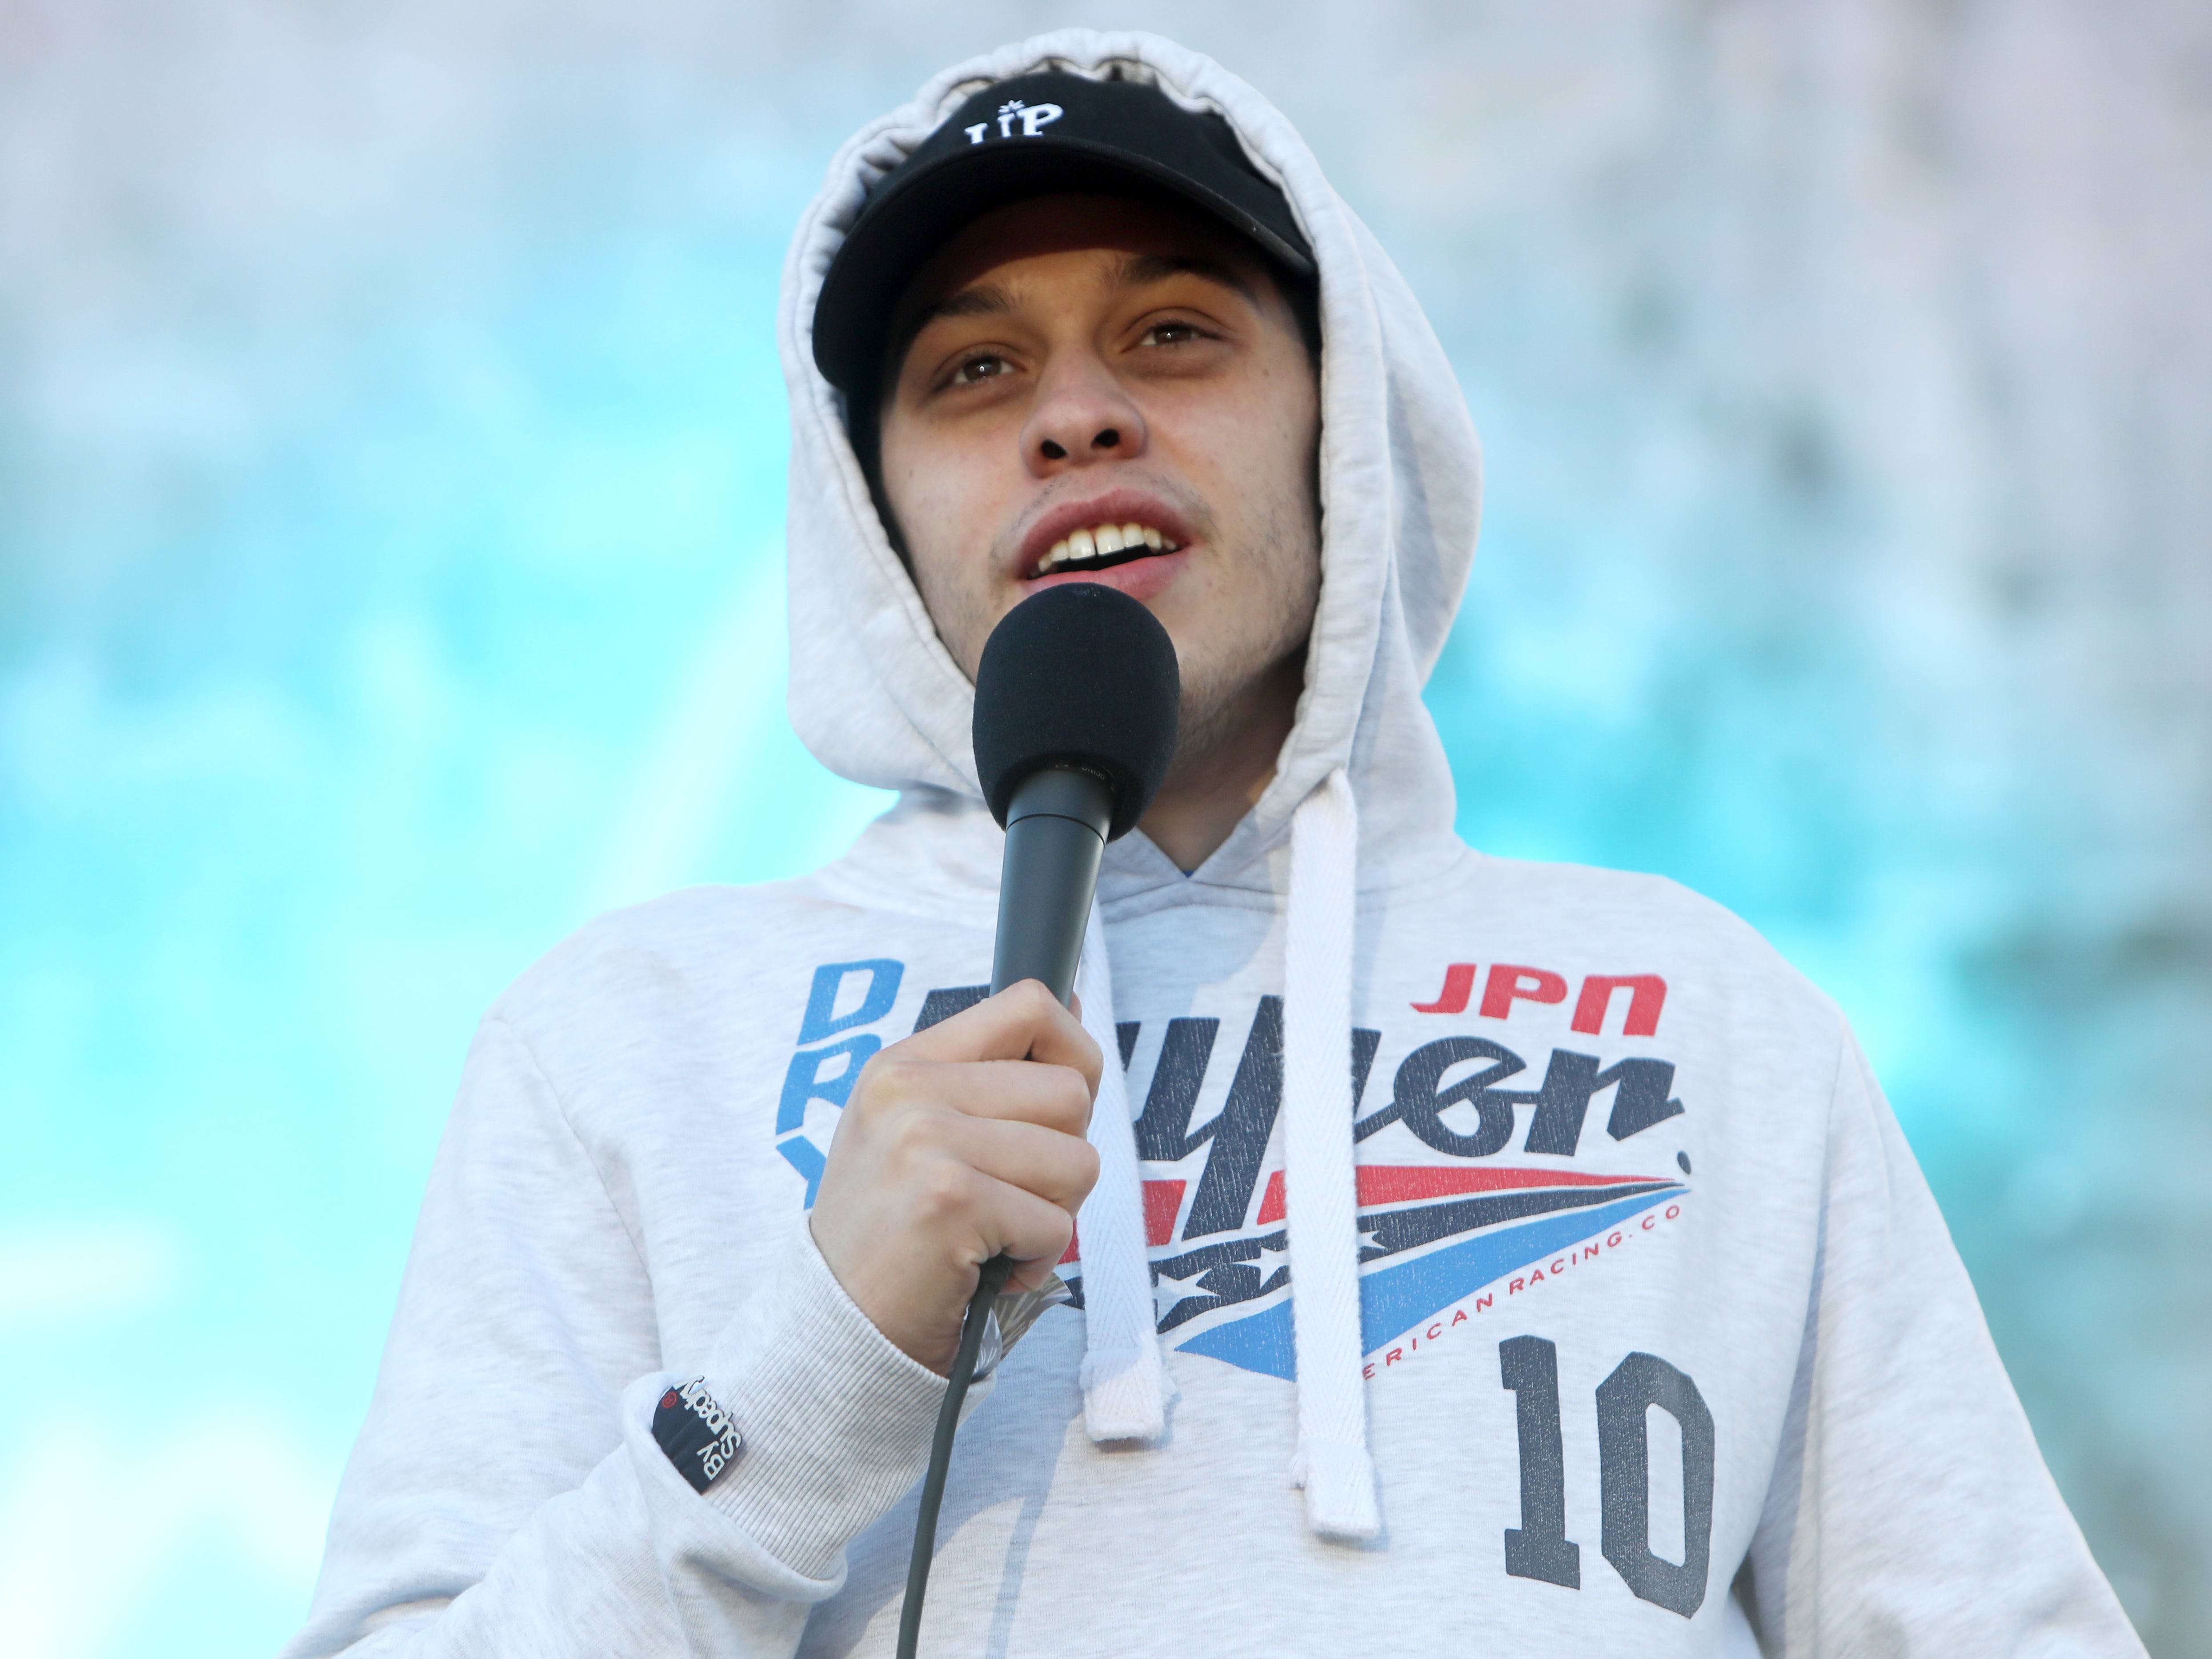 Pete Davidson says his standup performance during the pandemic 'felt